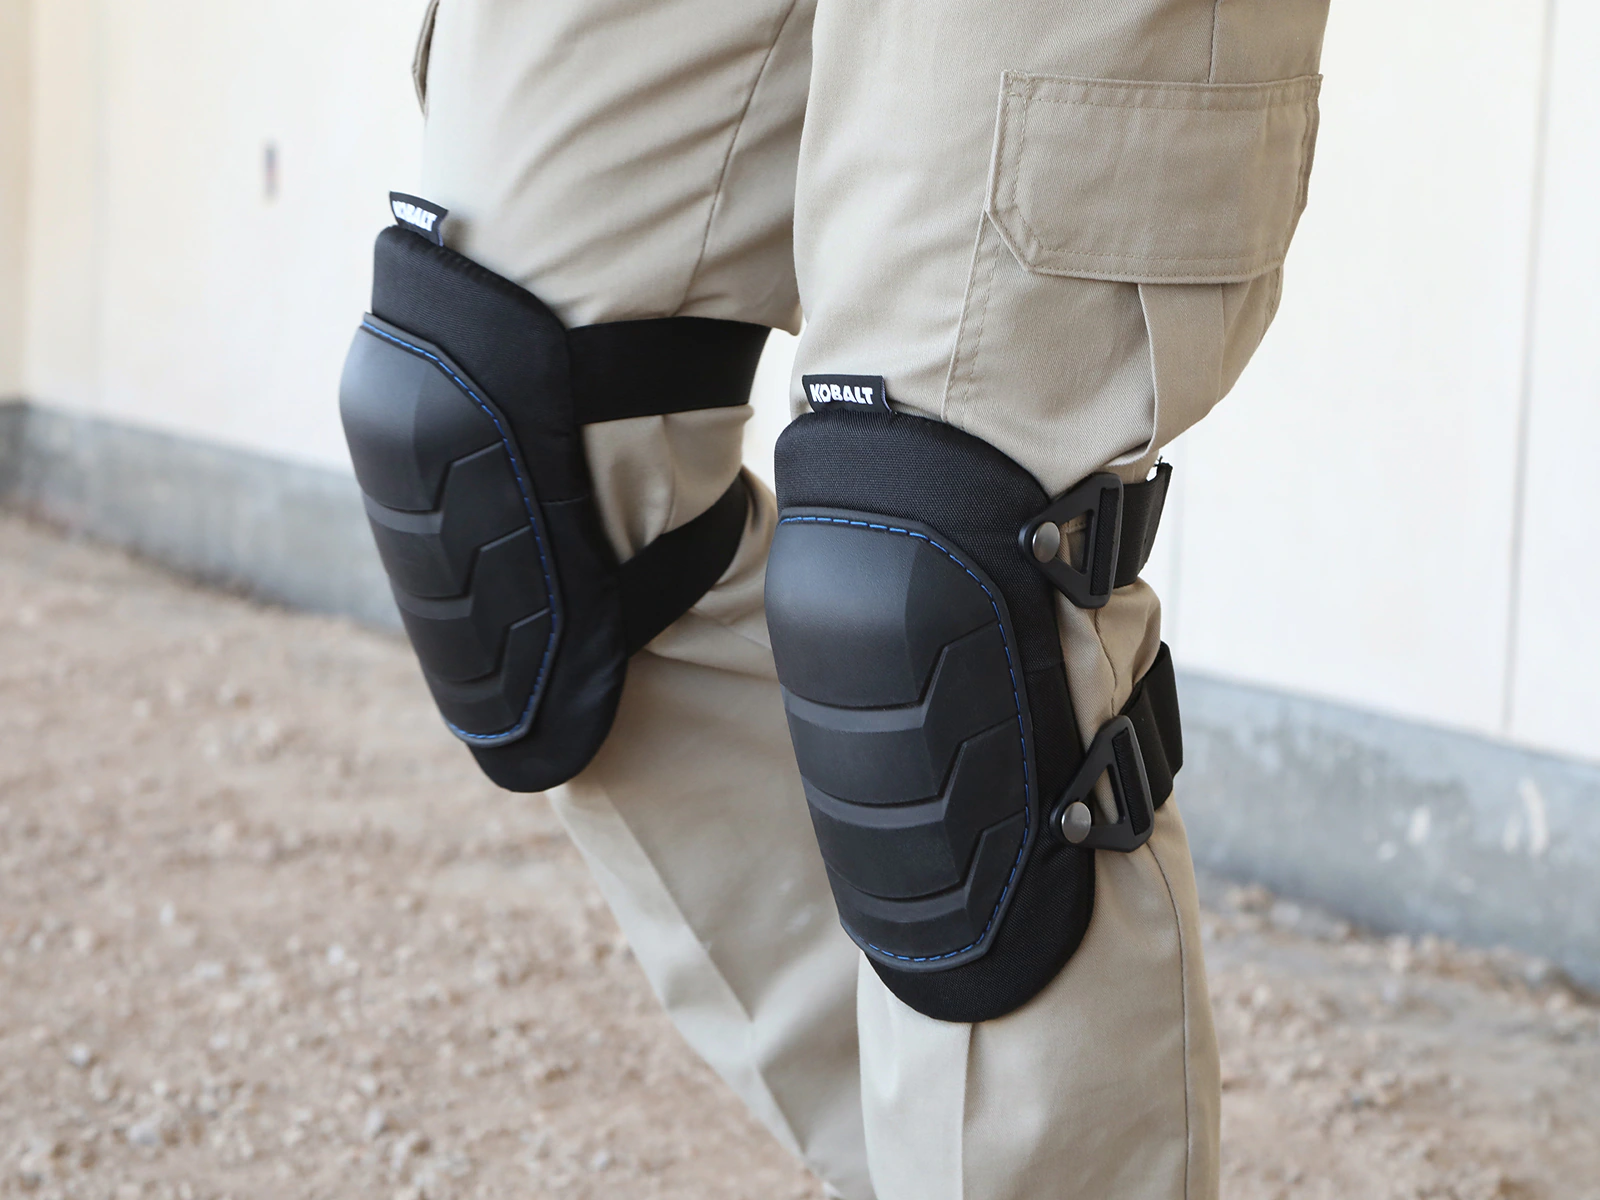 Knee Pads The Definitive Safety Guide Best Knee Pad